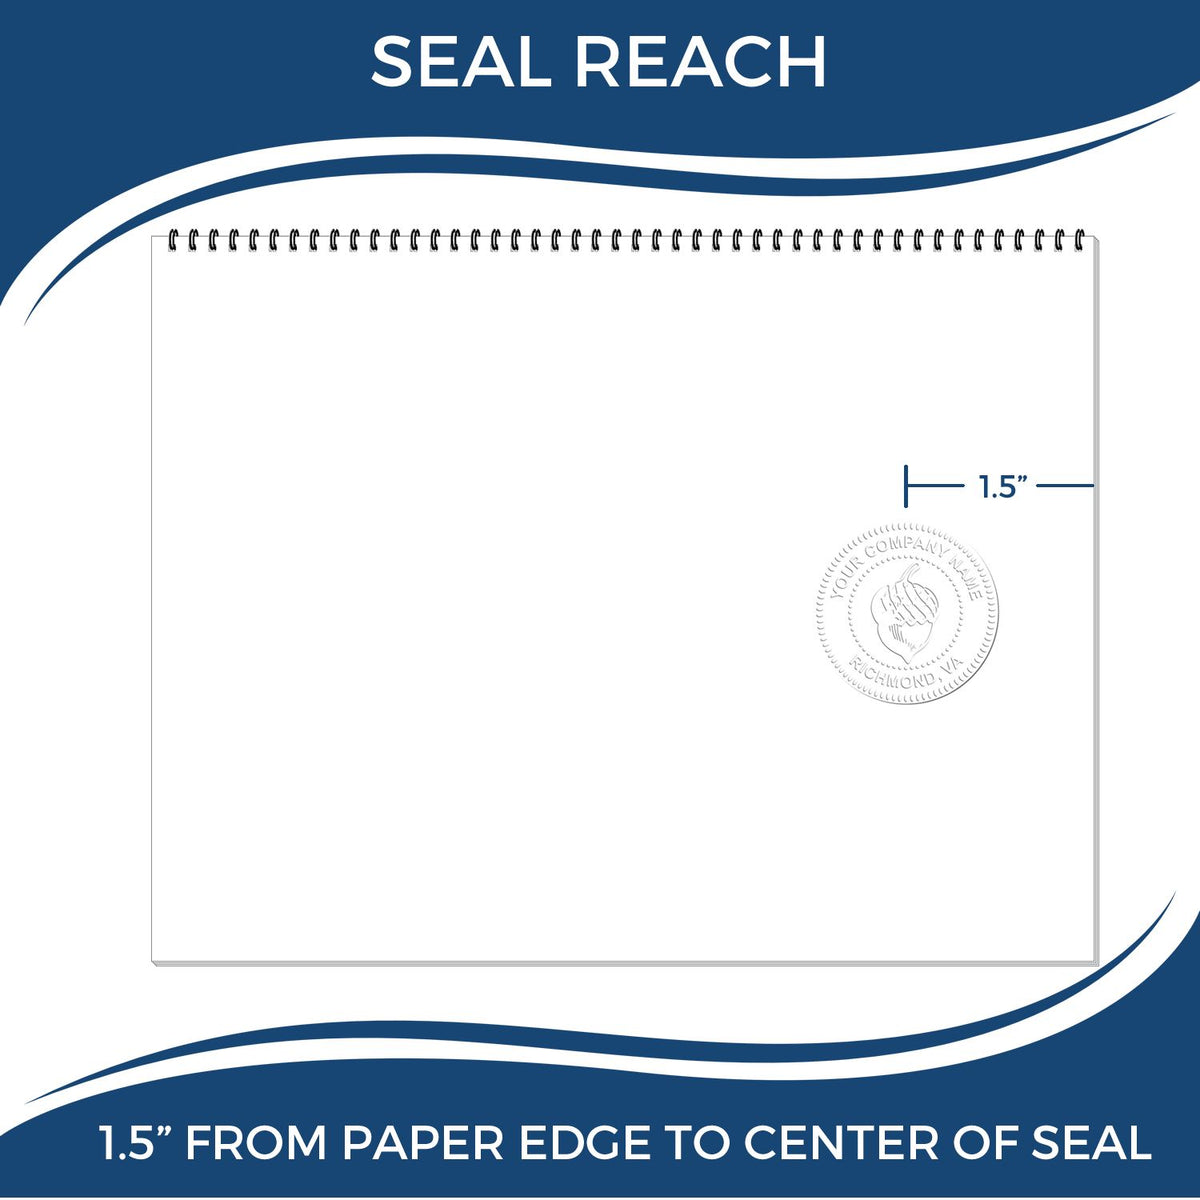 An infographic showing the seal reach which is represented by a ruler and a miniature seal image of the Illinois Engineer Desk Seal